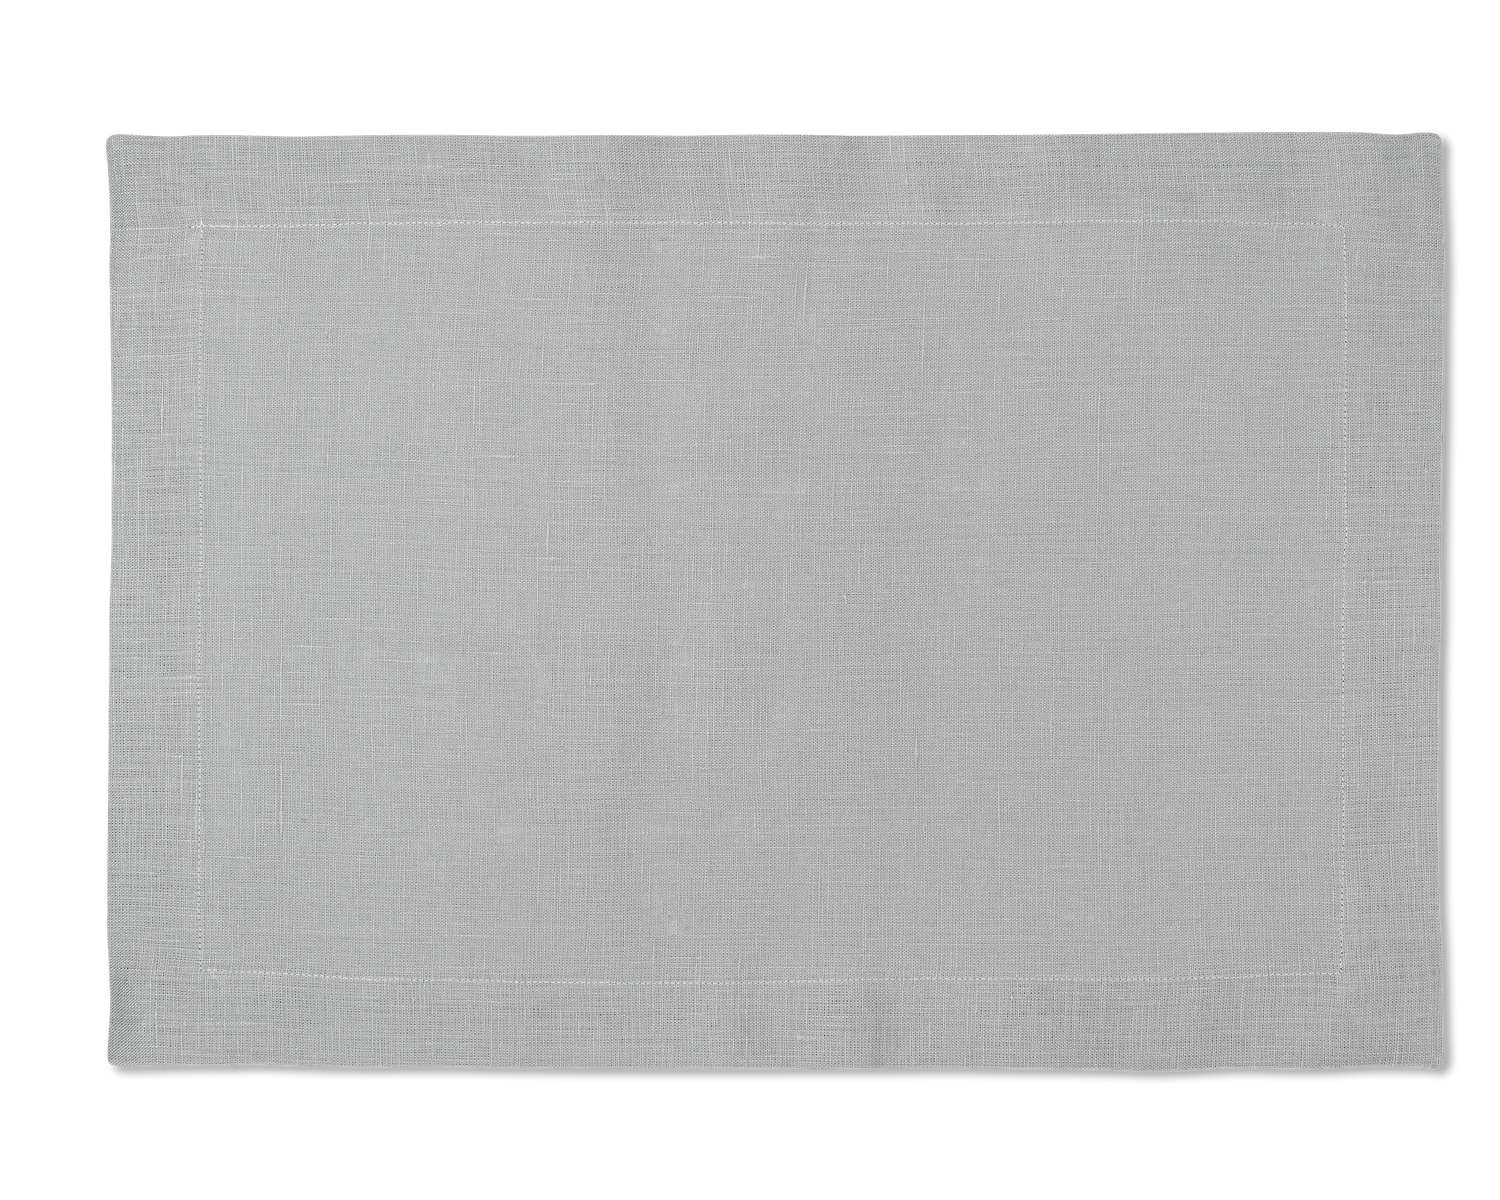 A linen placemat in the color gray